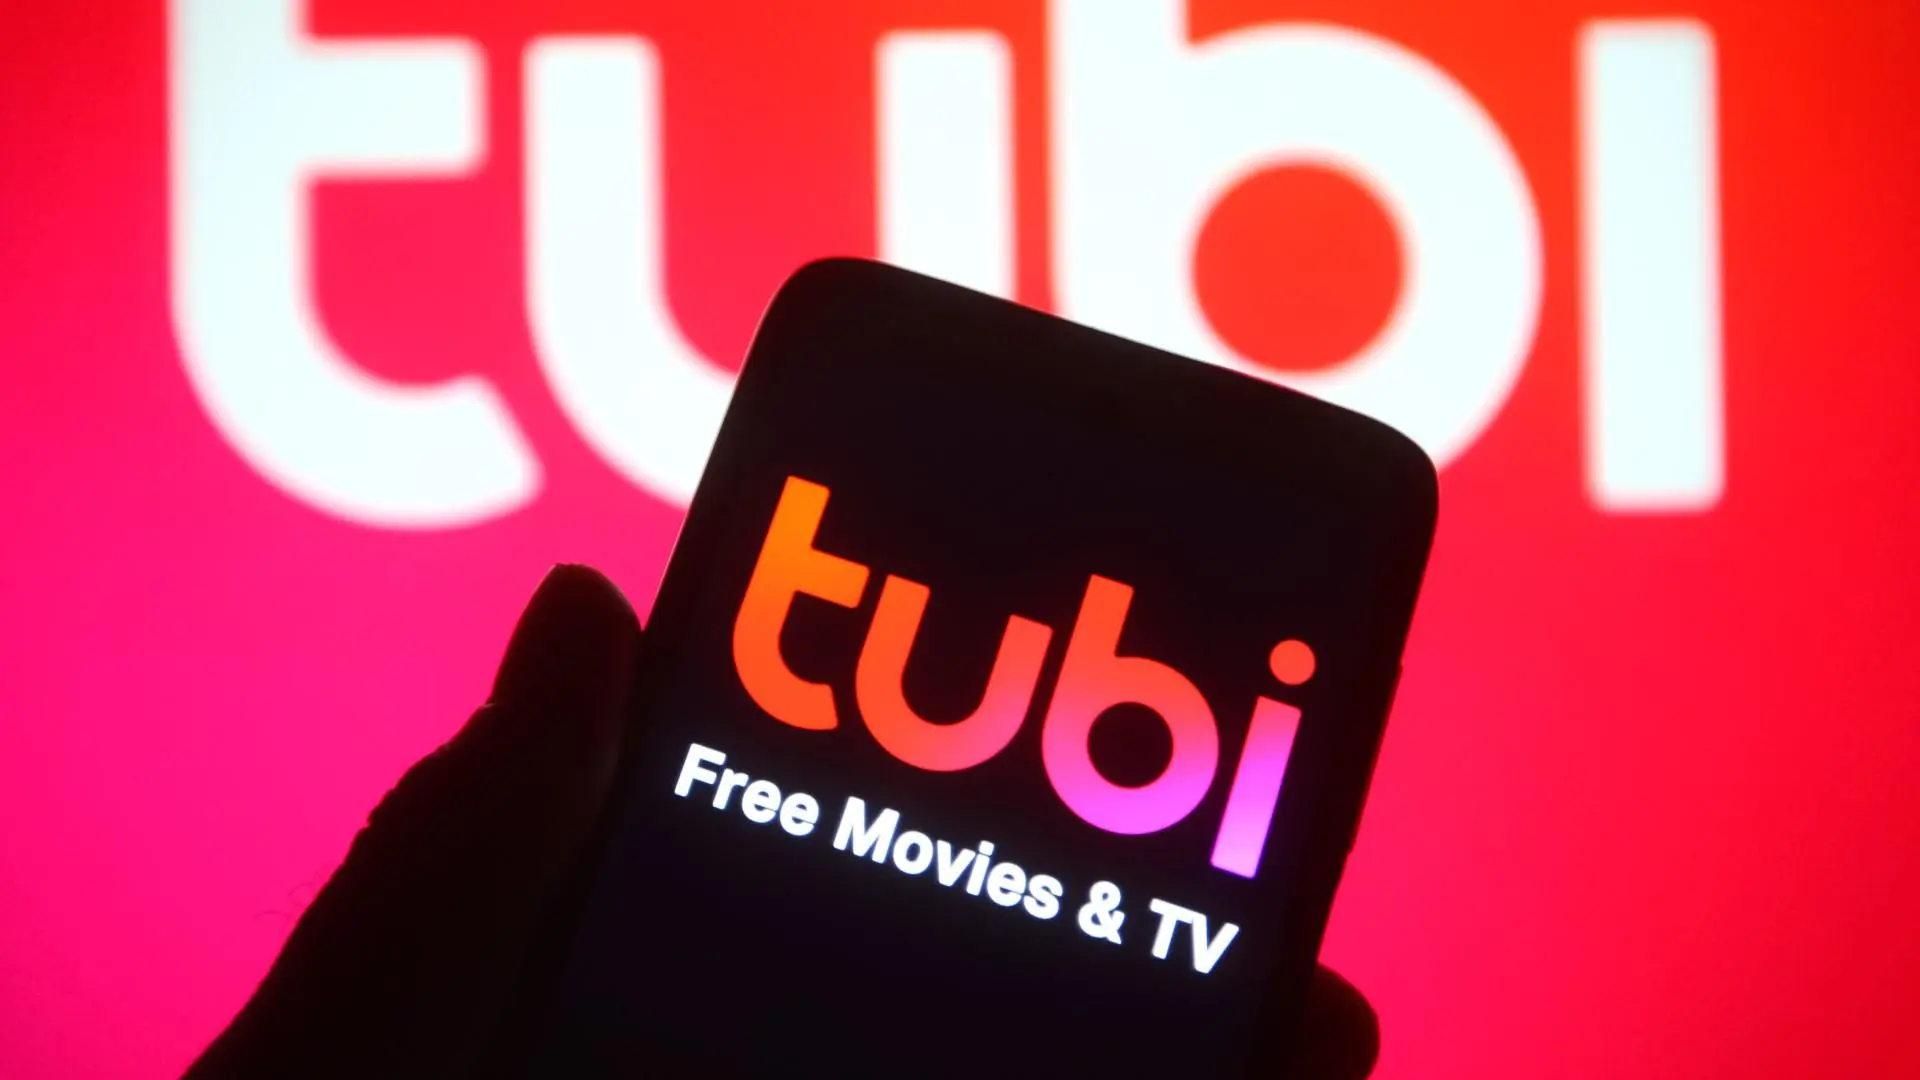 A phone is held up that says "Tubi free movies & TV". 